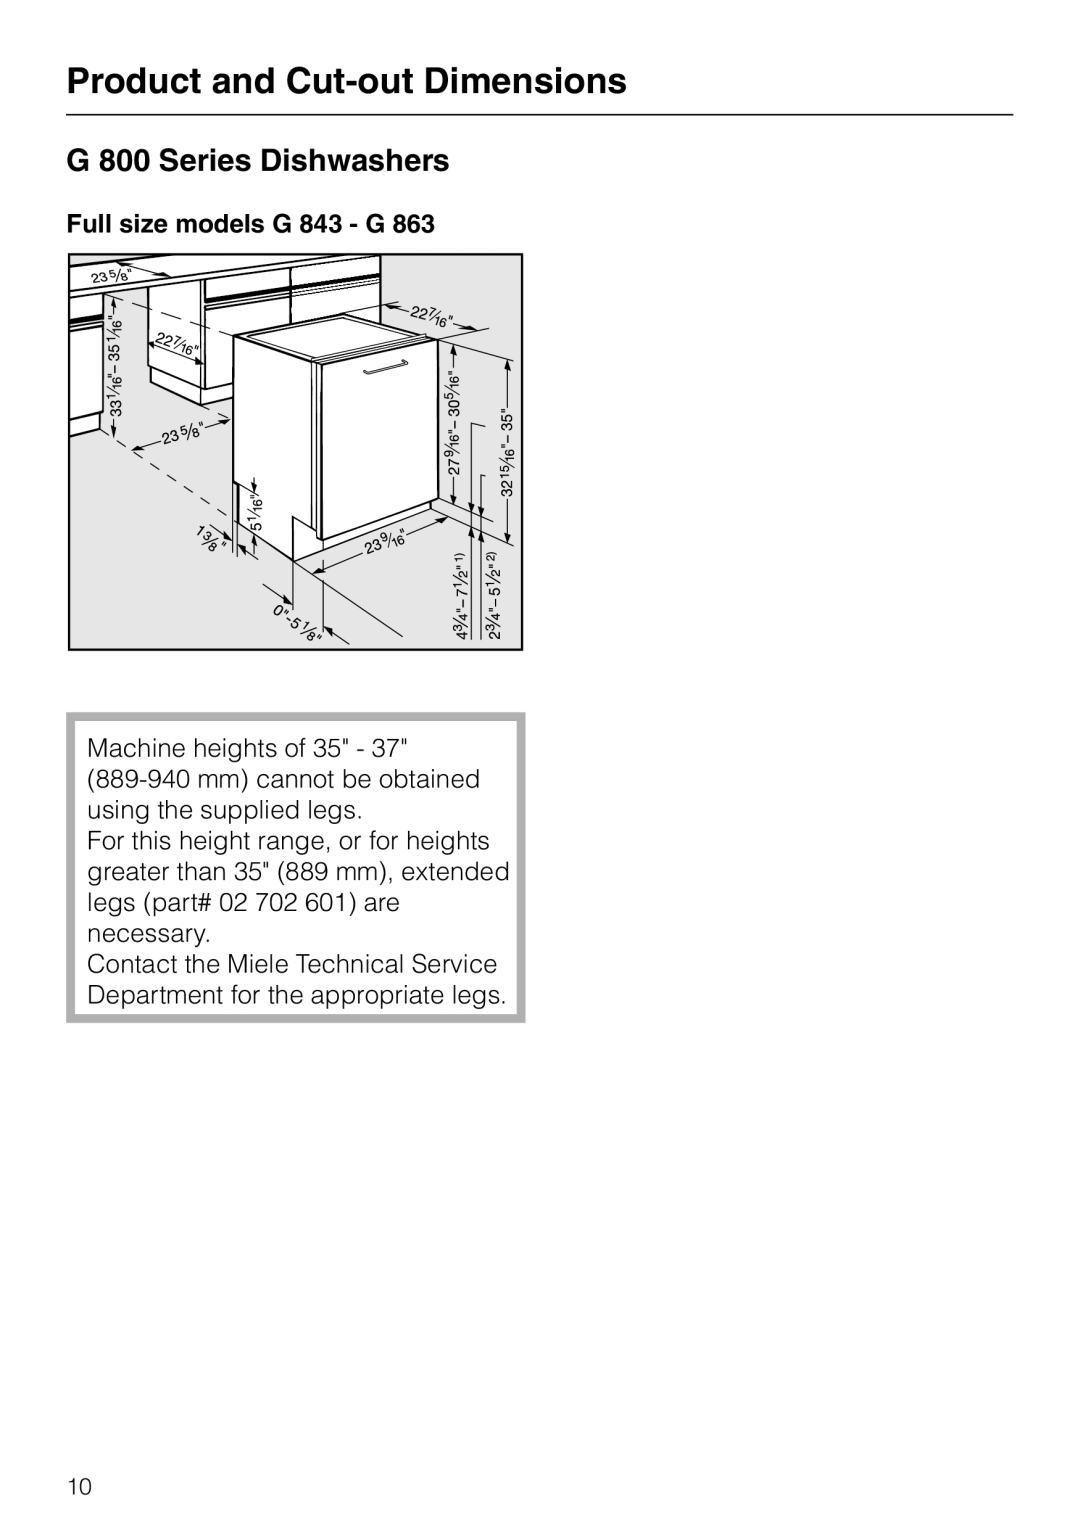 Miele HG01 installation instructions G 800 Series Dishwashers, Full size models G 843 - G, Product and Cut-outDimensions 